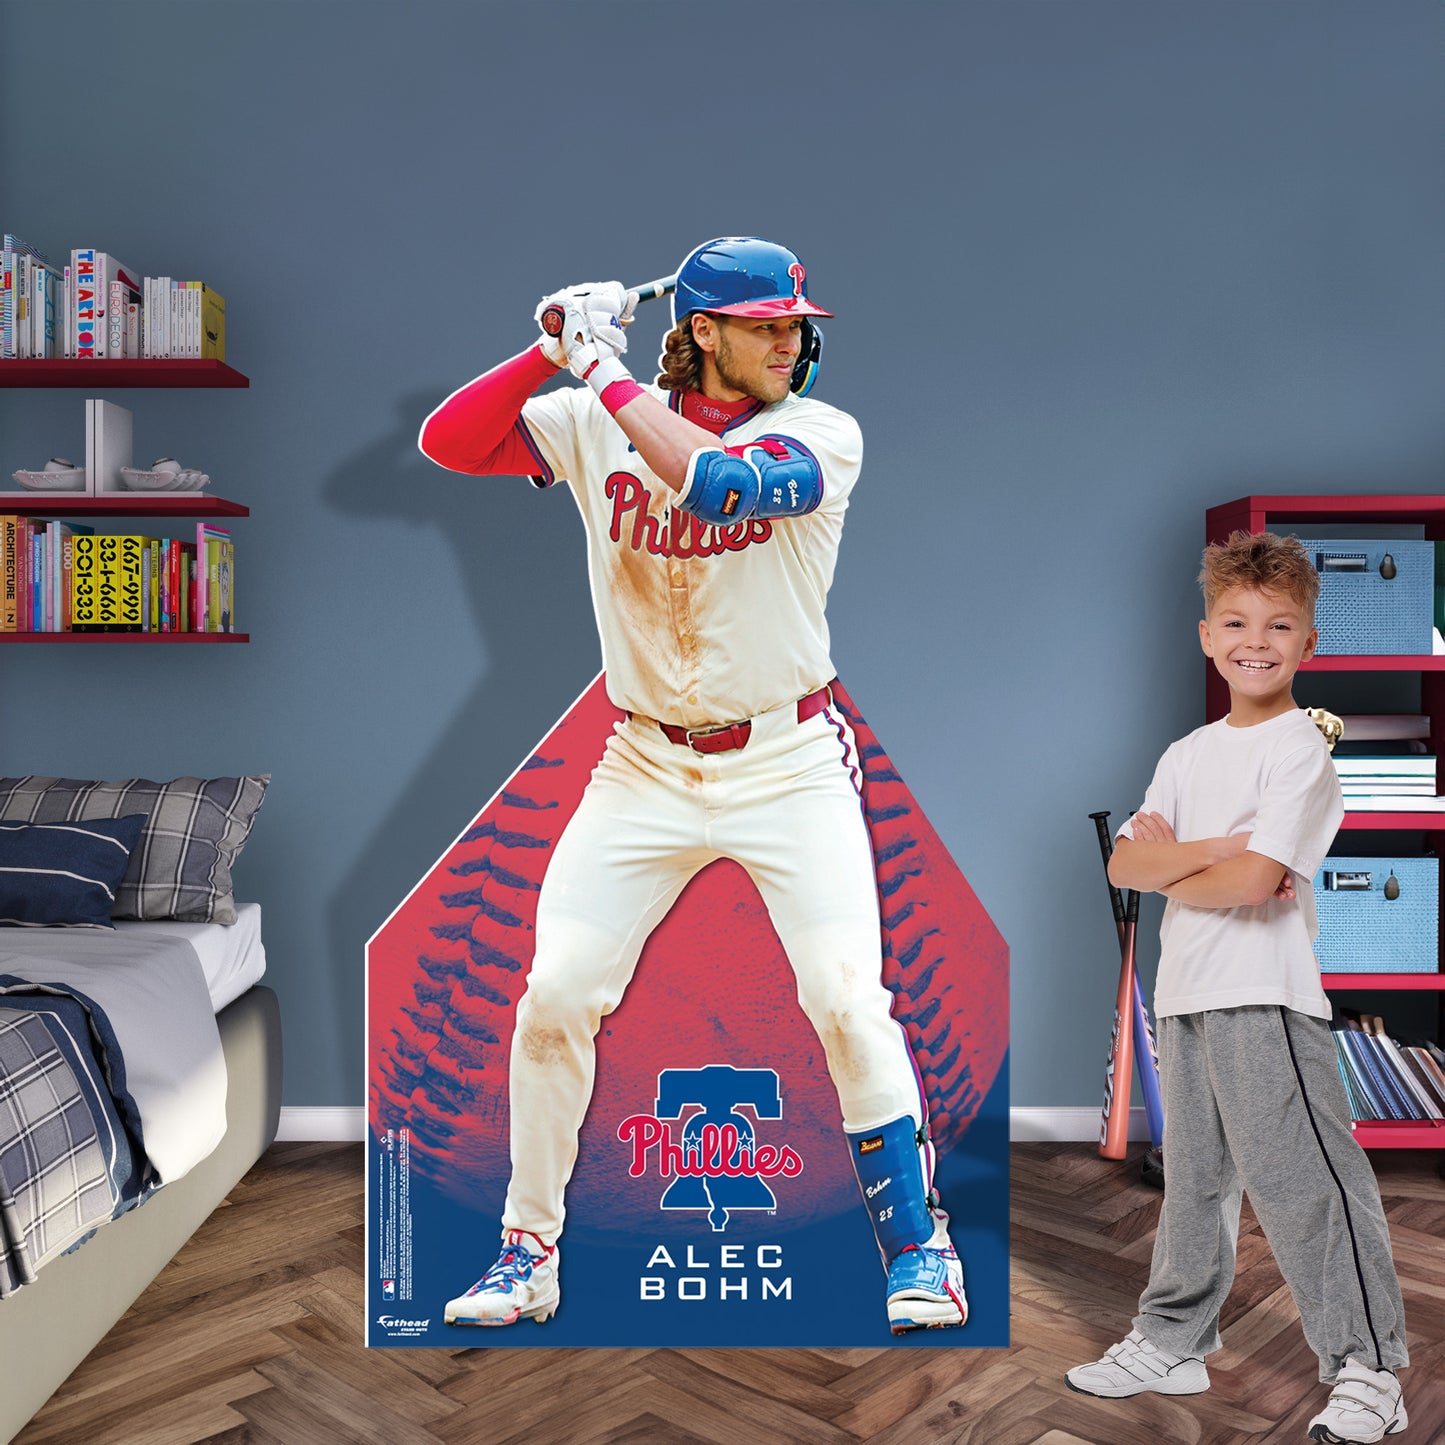 Philadelphia Phillies: Alec Bohm Life-Size   Foam Core Cutout  - Officially Licensed MLB    Stand Out